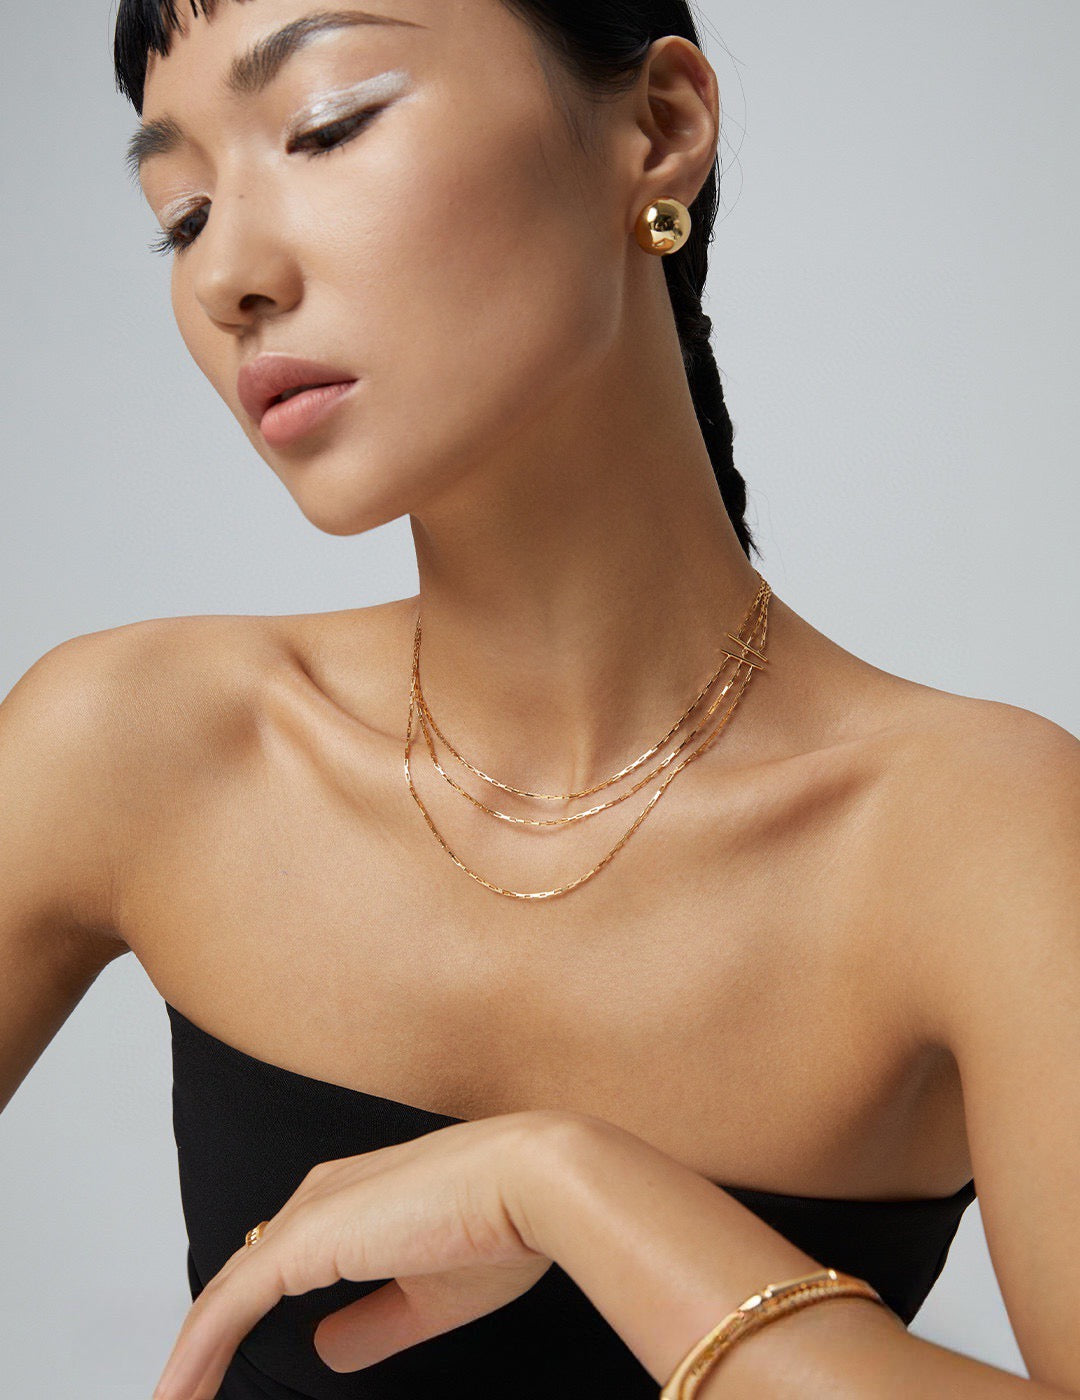 A Harmonious Ensemble - Triple Necklace Ensemble - S925 Sterling Silver with 18K Gold Vermeil - an exquisite ensemble that epitomizes elegance and harmony - the perfect addition to complete any outfit